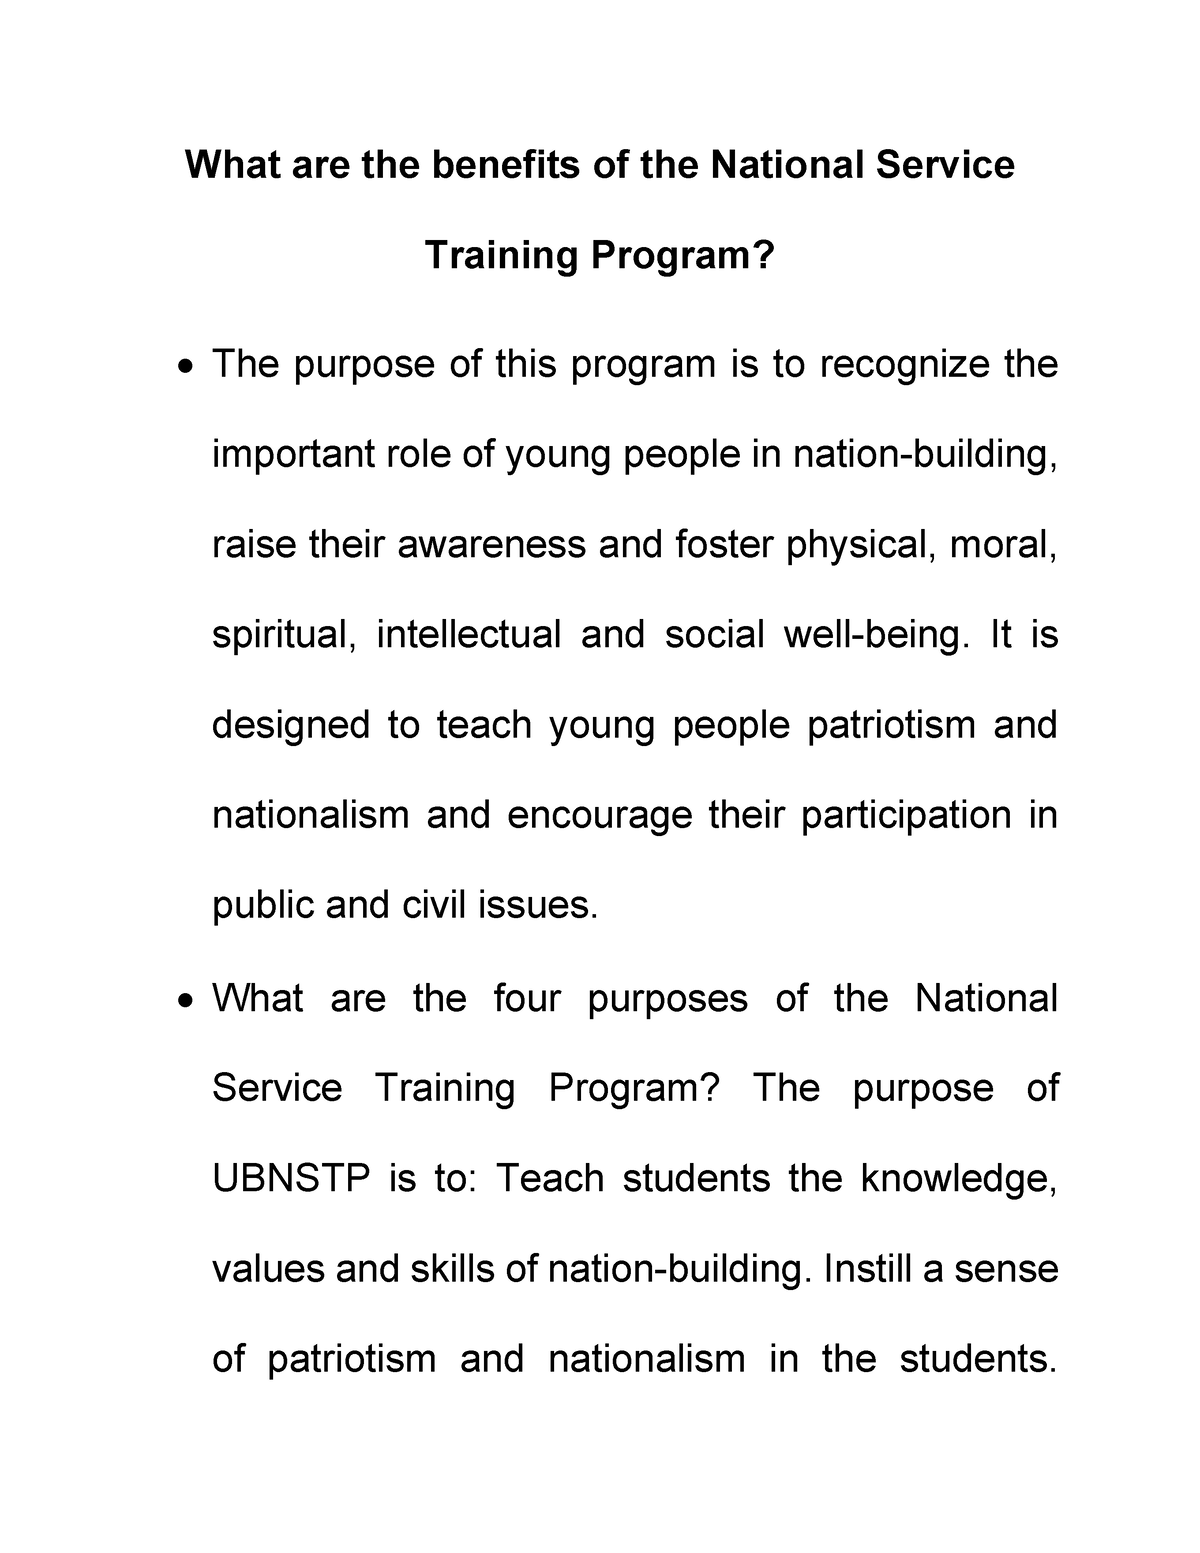 what-are-the-benefits-of-the-national-service-training-program-what